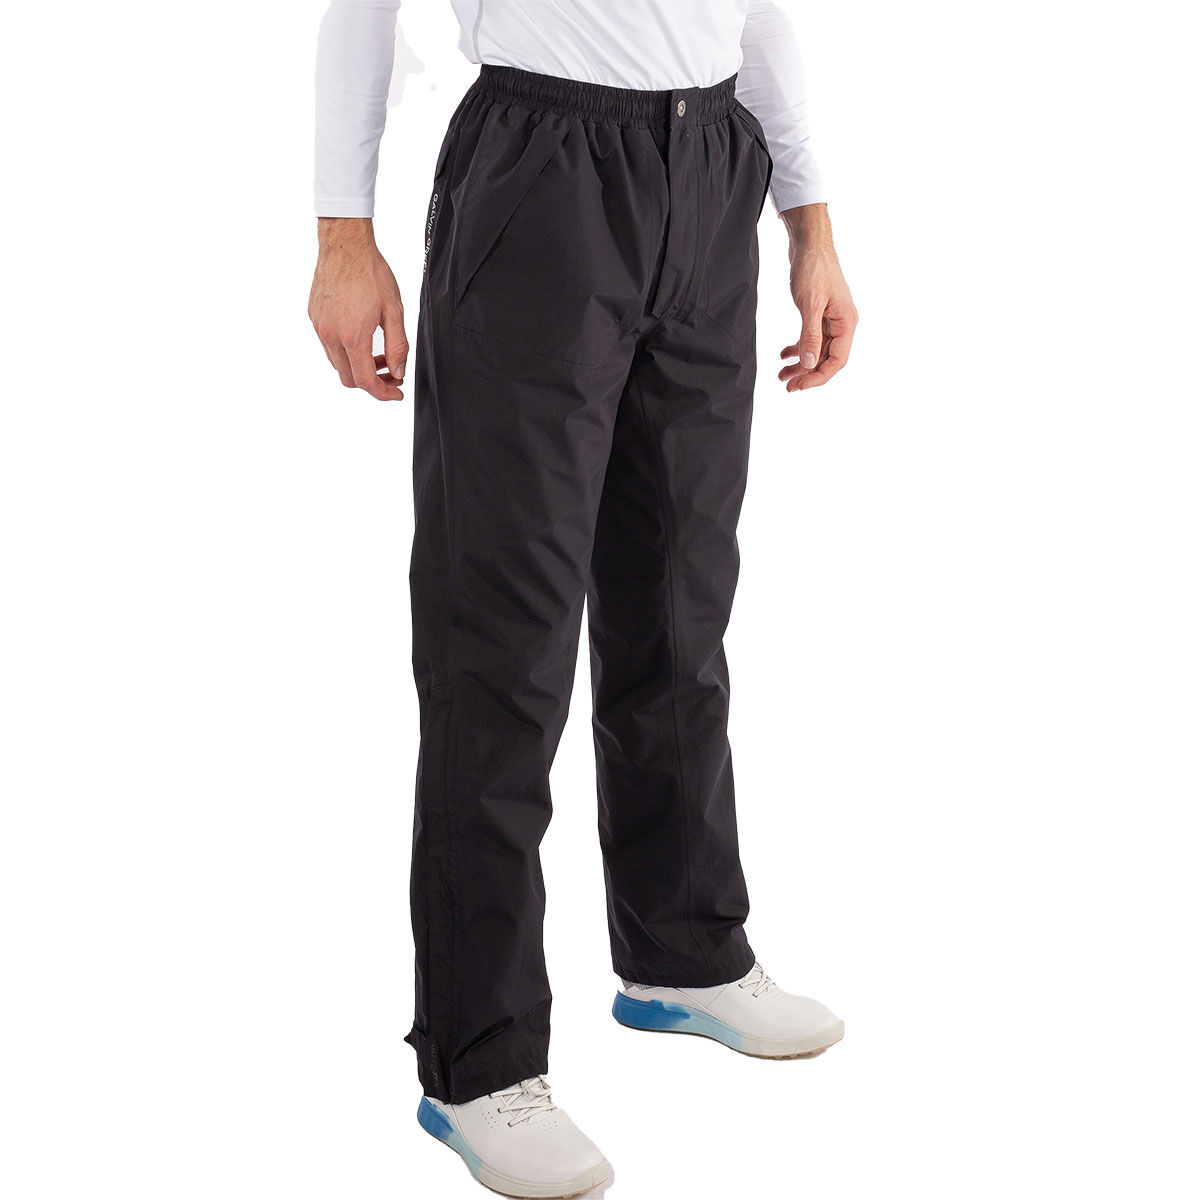 Galvin Green Mens Black Lightweight Andy GORE-TEX Waterproof Long Fit Golf Trousers, Size: M | American Golf von Galvin Green